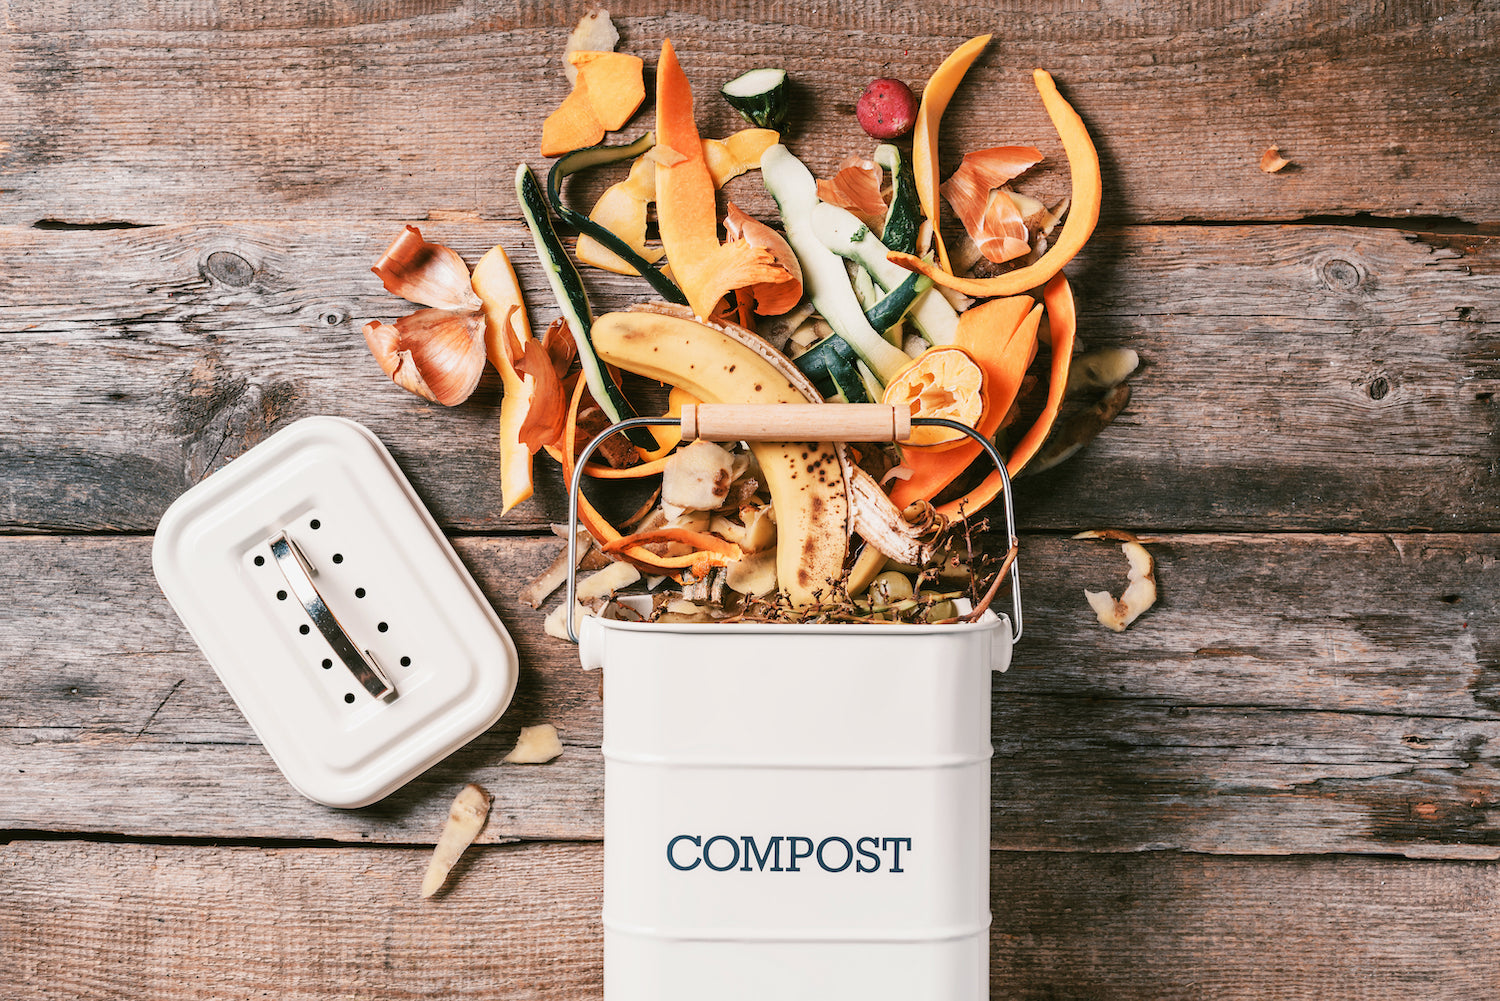 COMPOSTING GUIDE